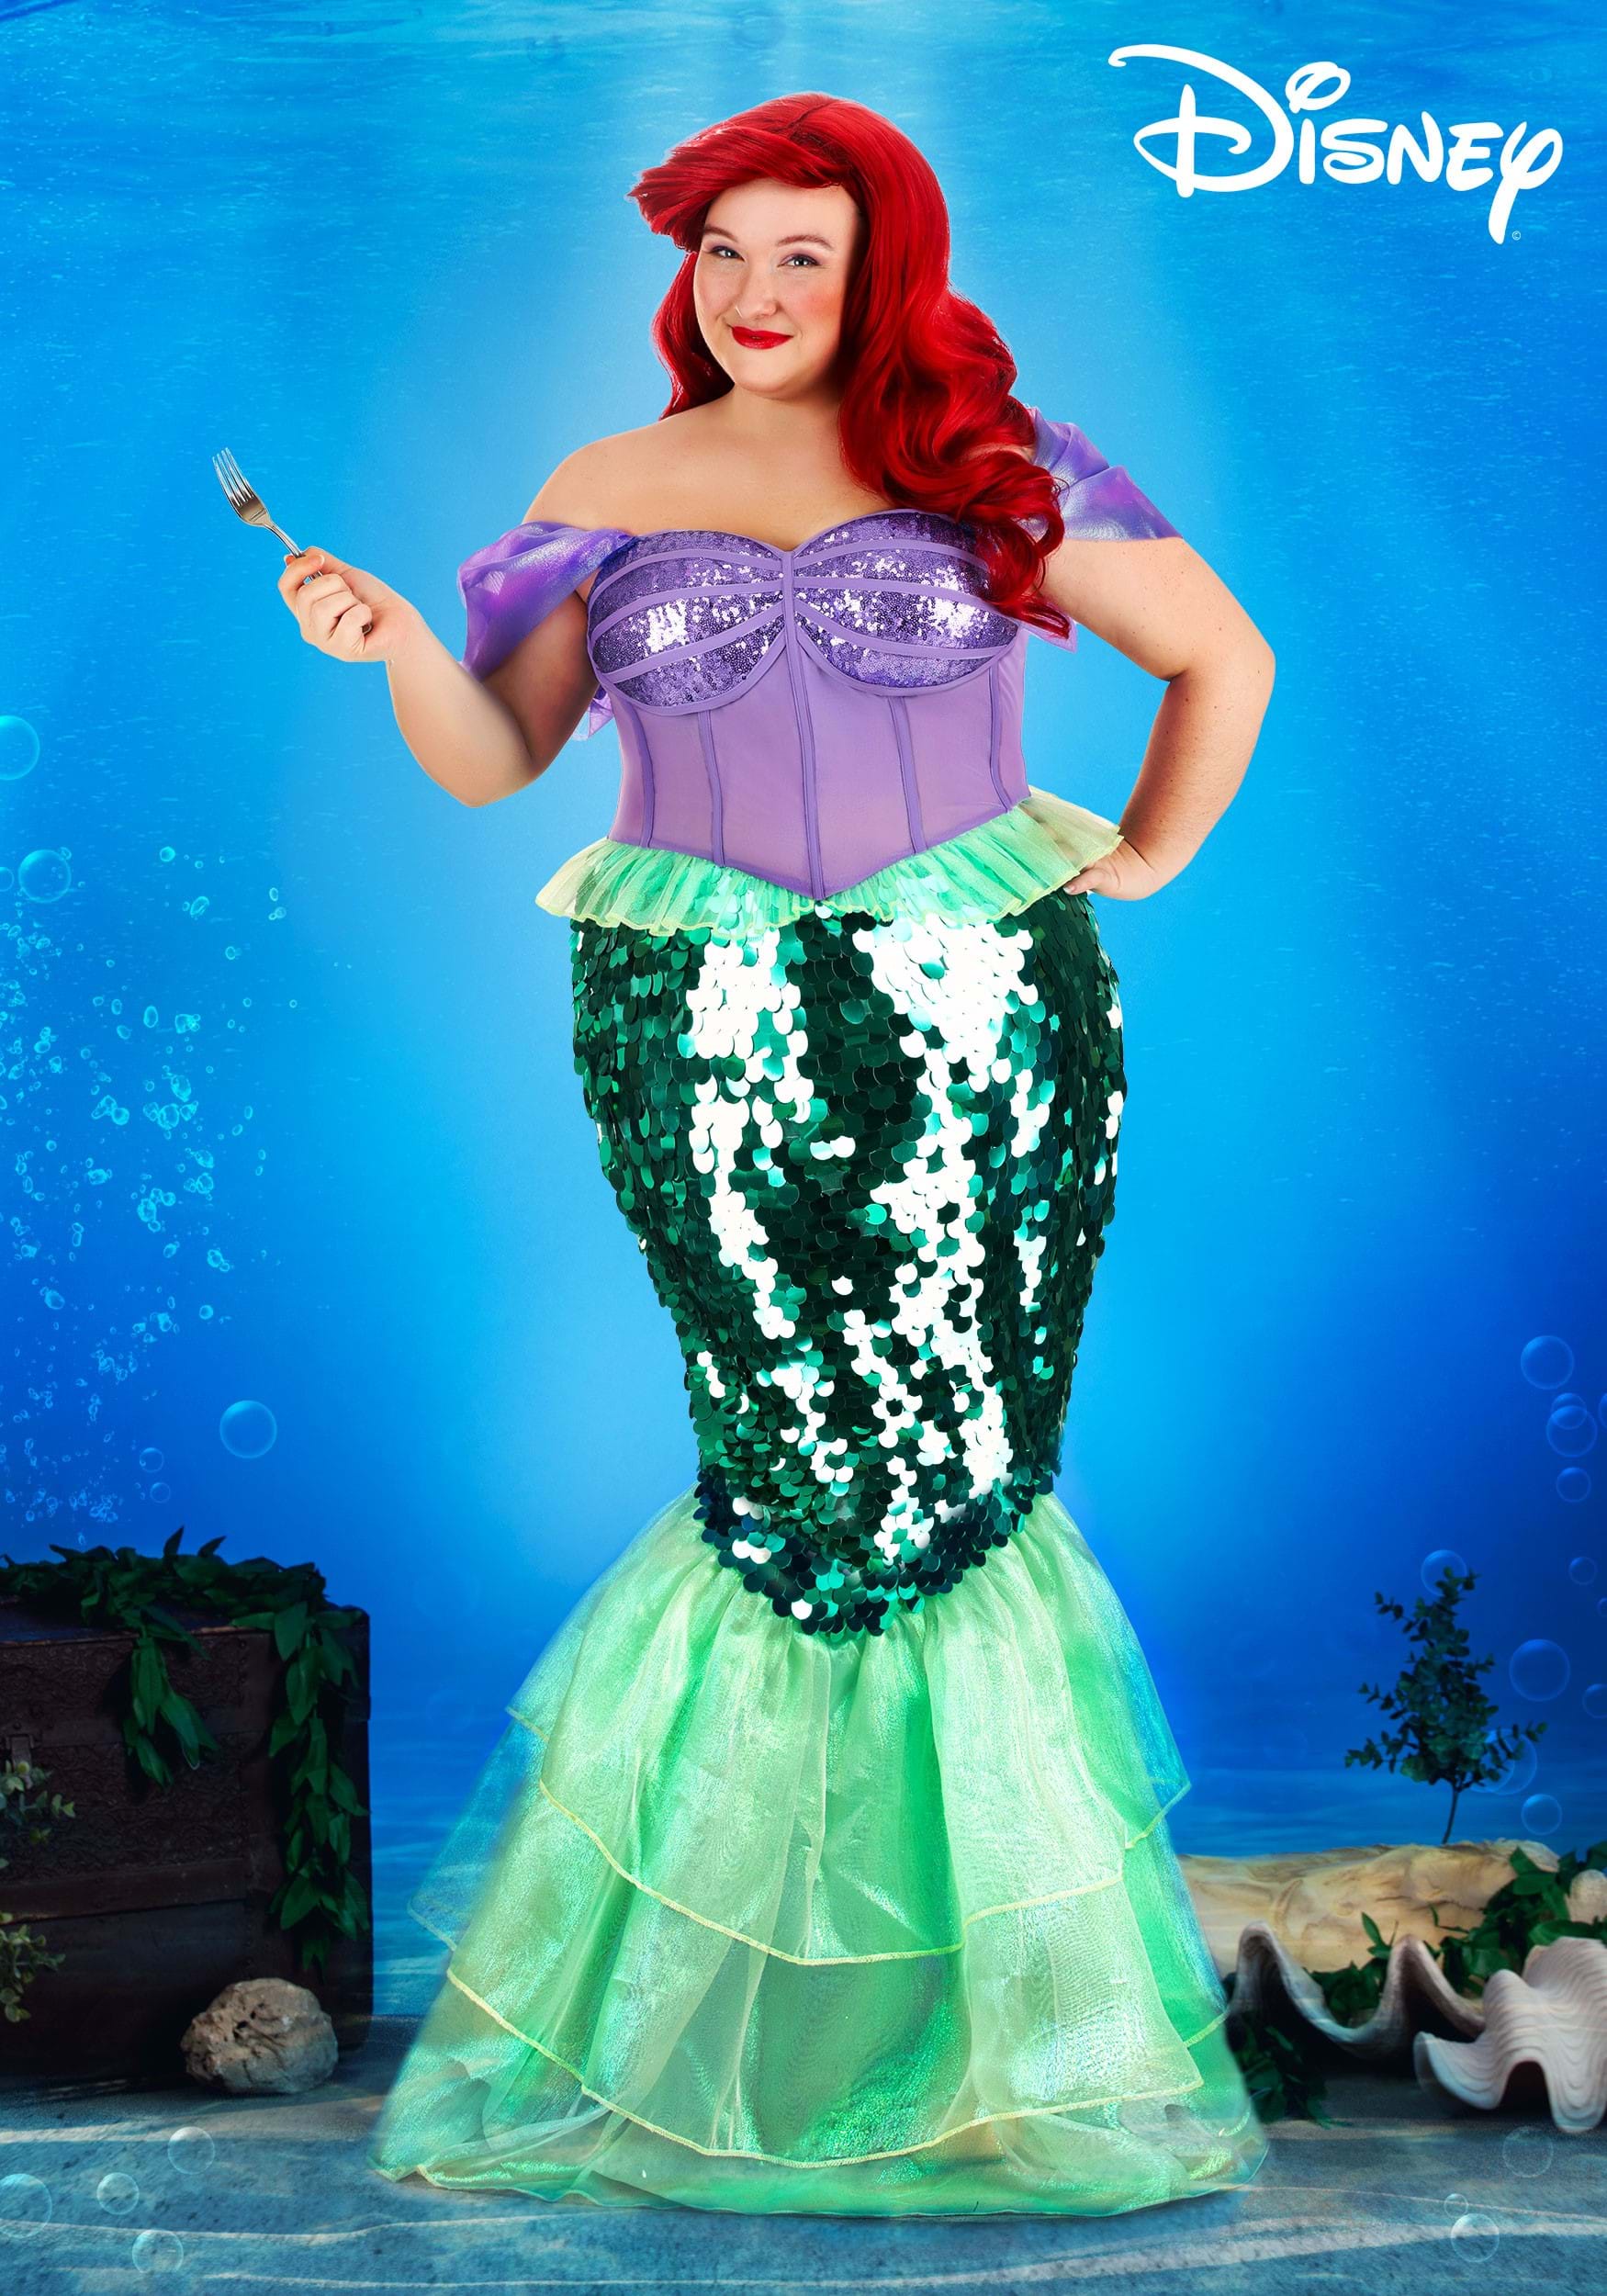 Embracing Individuality with Mermaid Dress